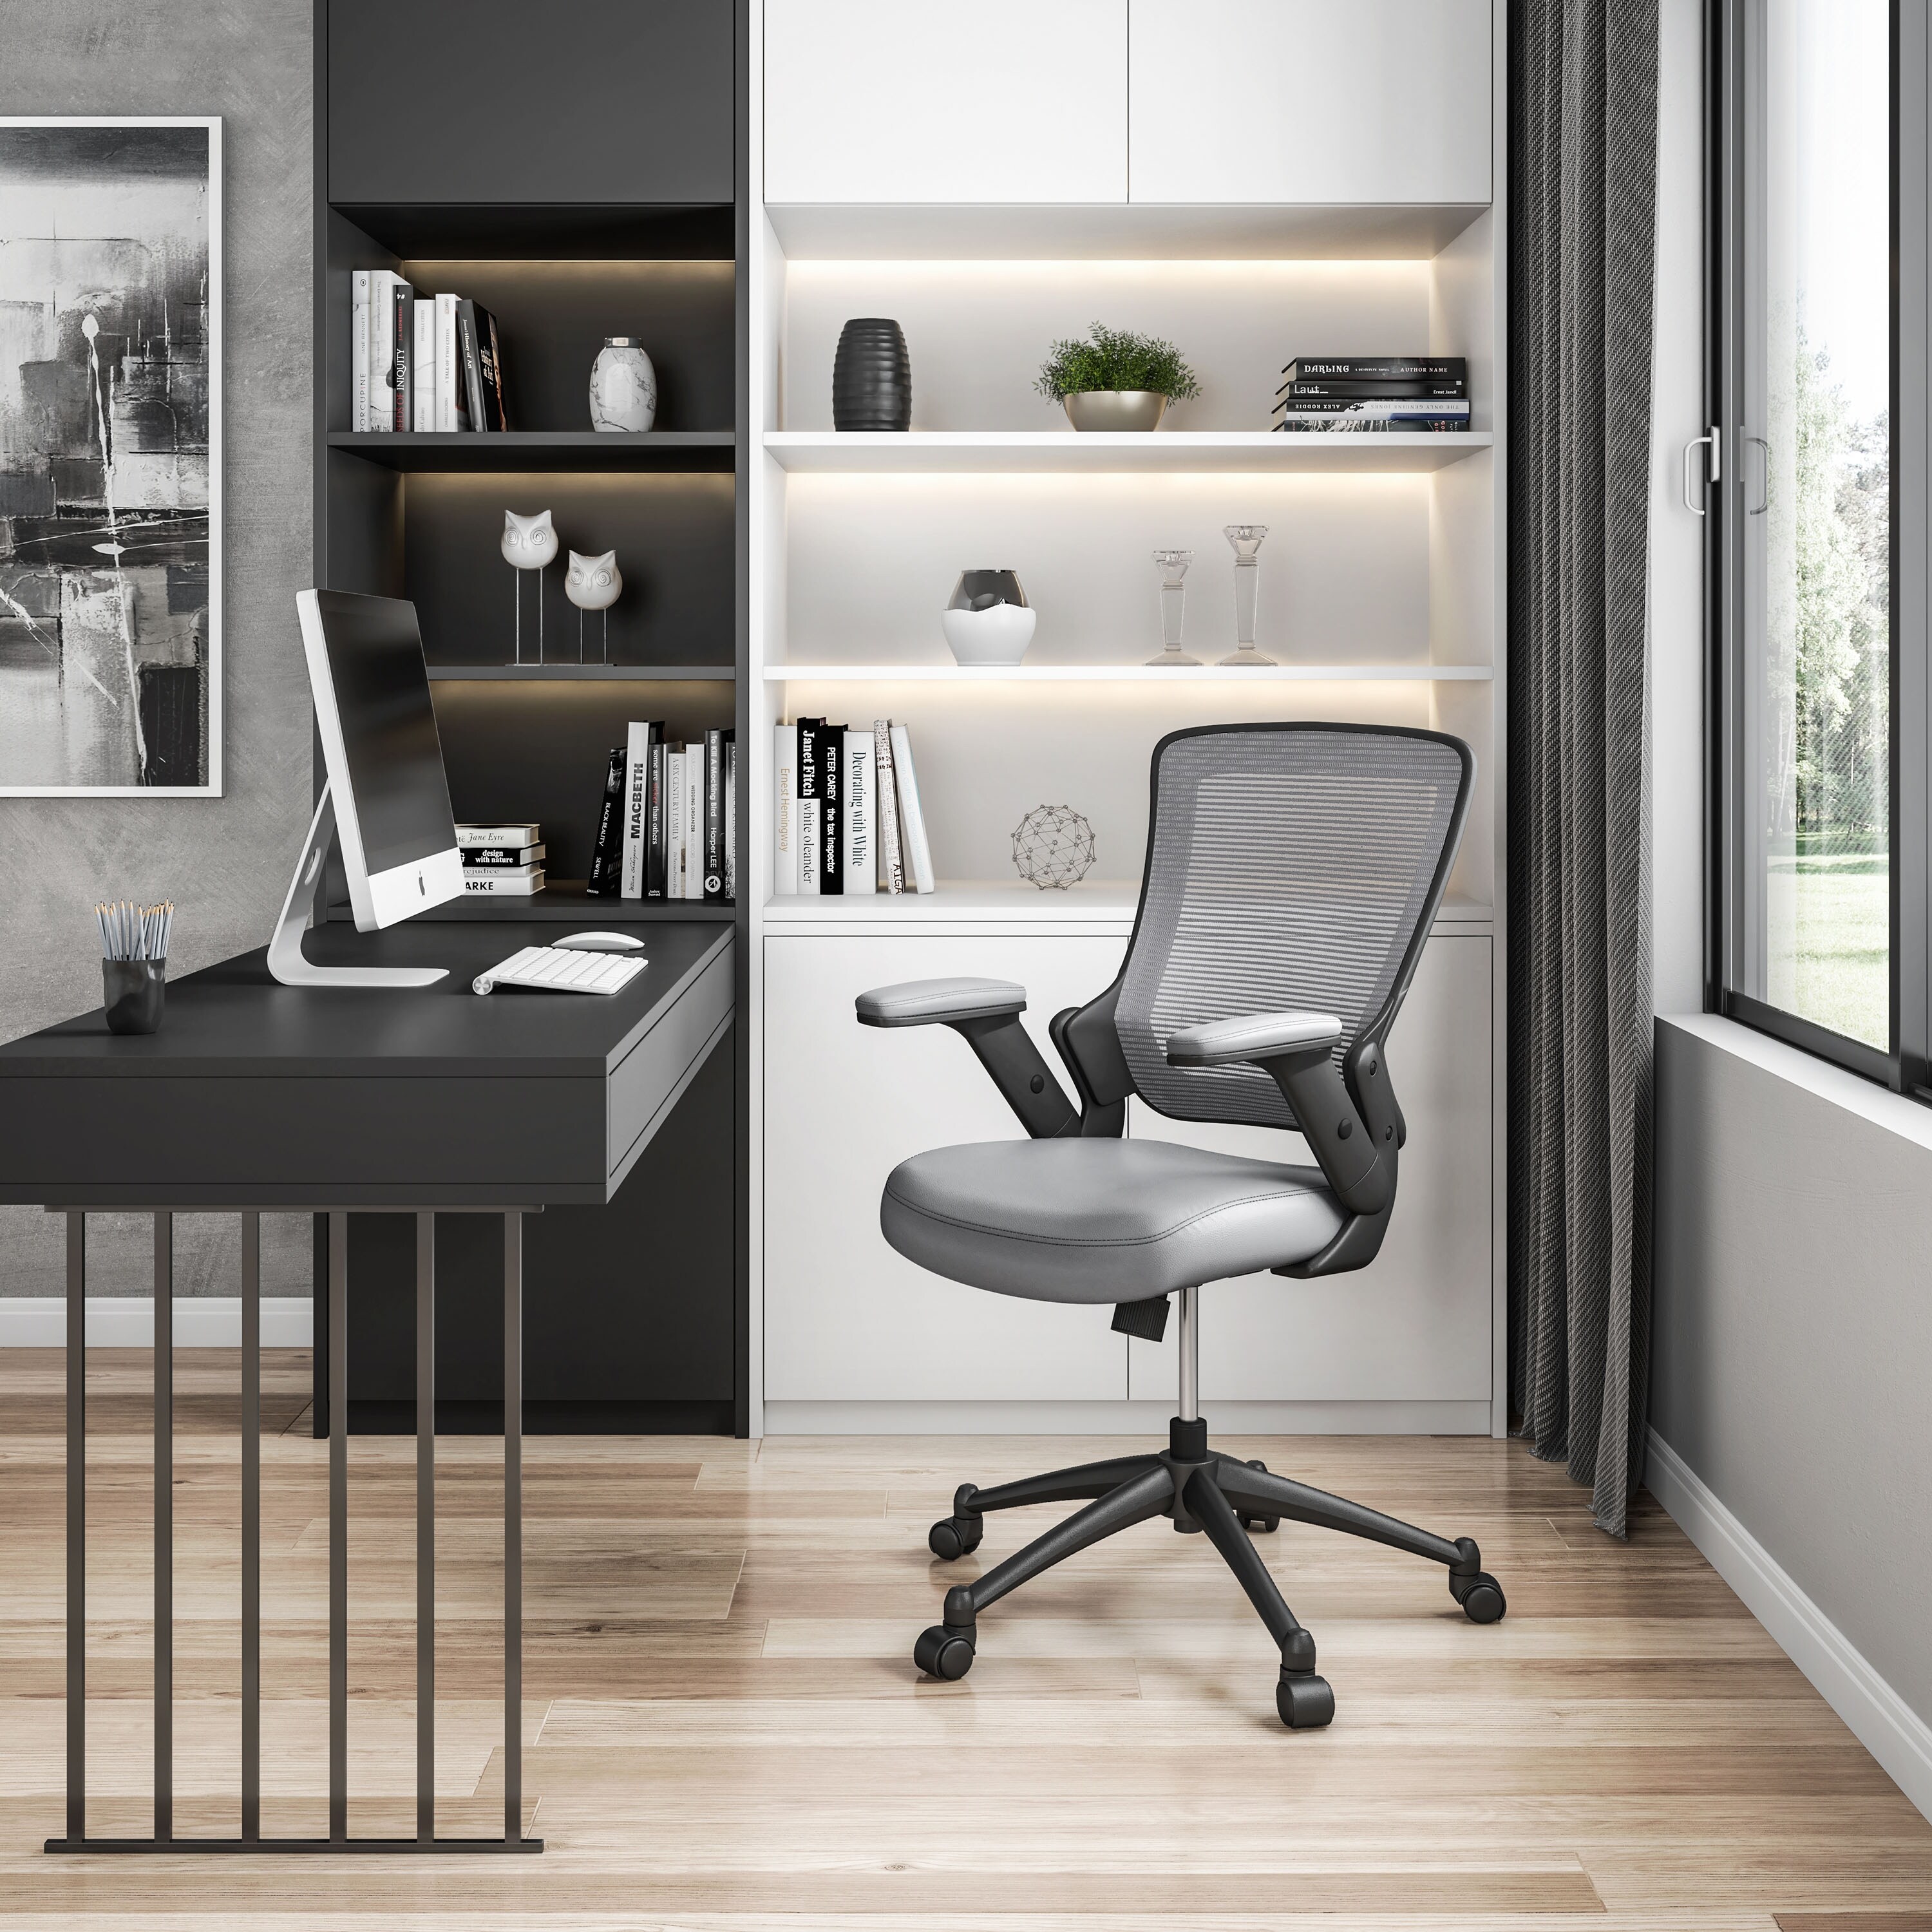 https://ak1.ostkcdn.com/images/products/is/images/direct/82cbec1b10e35187f7460634ca1855bbe751194e/Breathable-Mesh-Ergonomic-Adjustable-Tilt-Task-Chair-with-Adjustable-Arm-Modern-Swivel-Executive-Office-Chairs-with-Casters.jpg